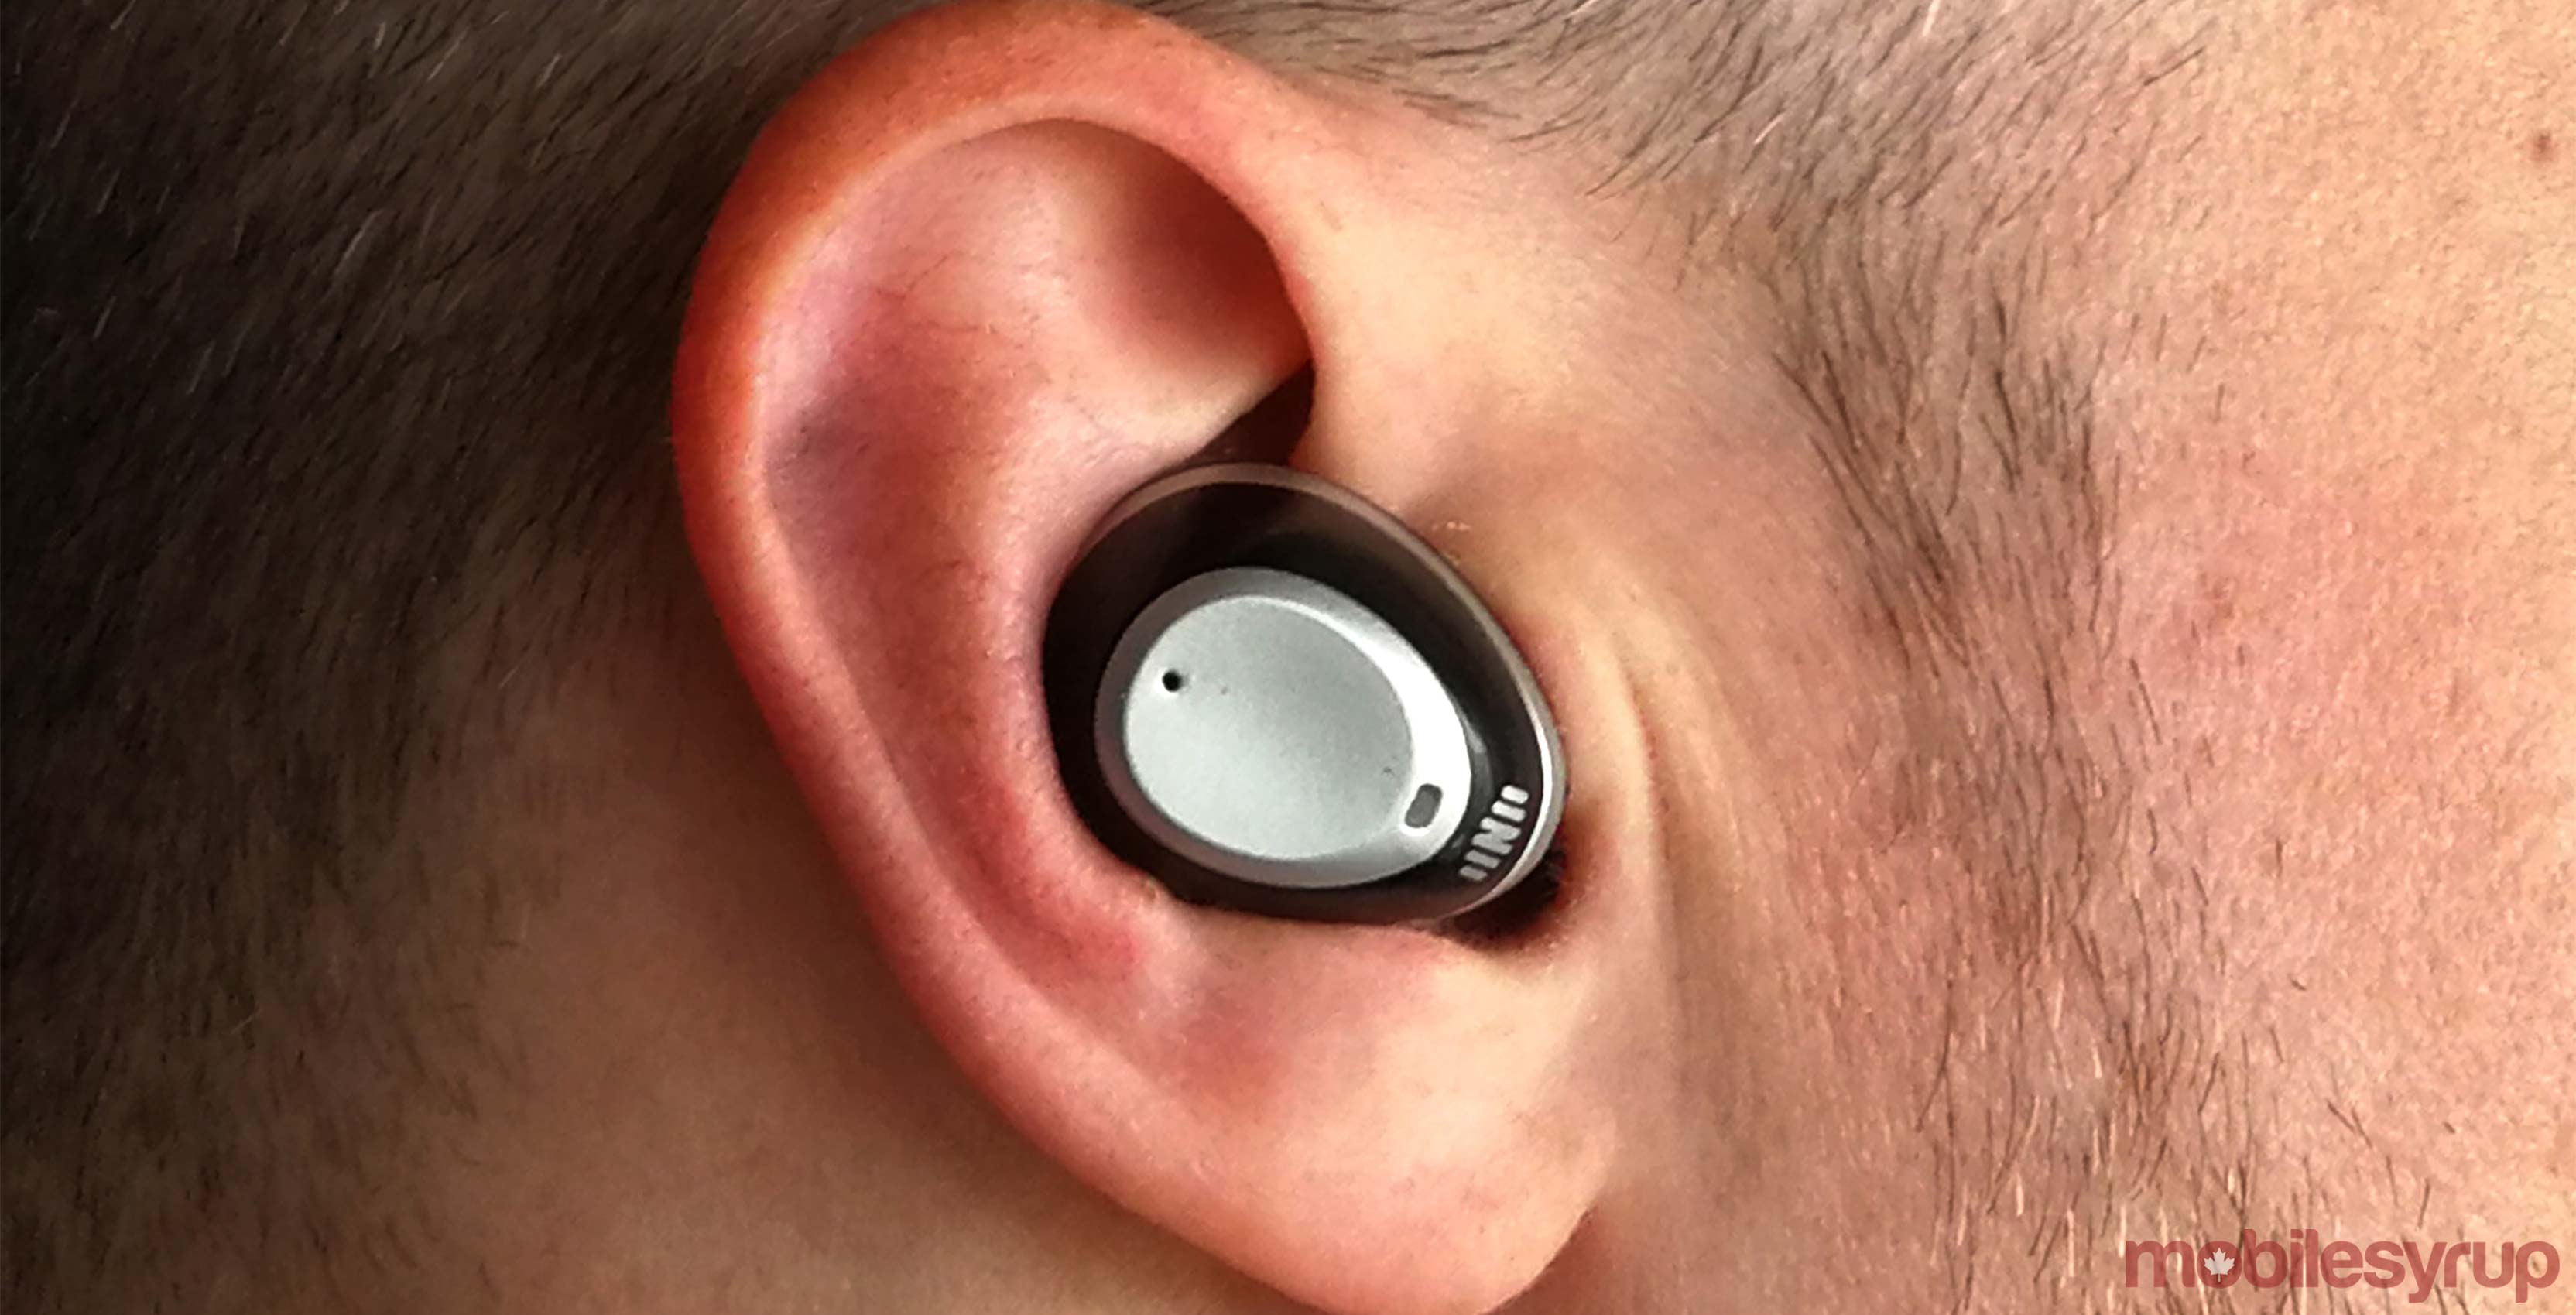 IQBuds in-ear